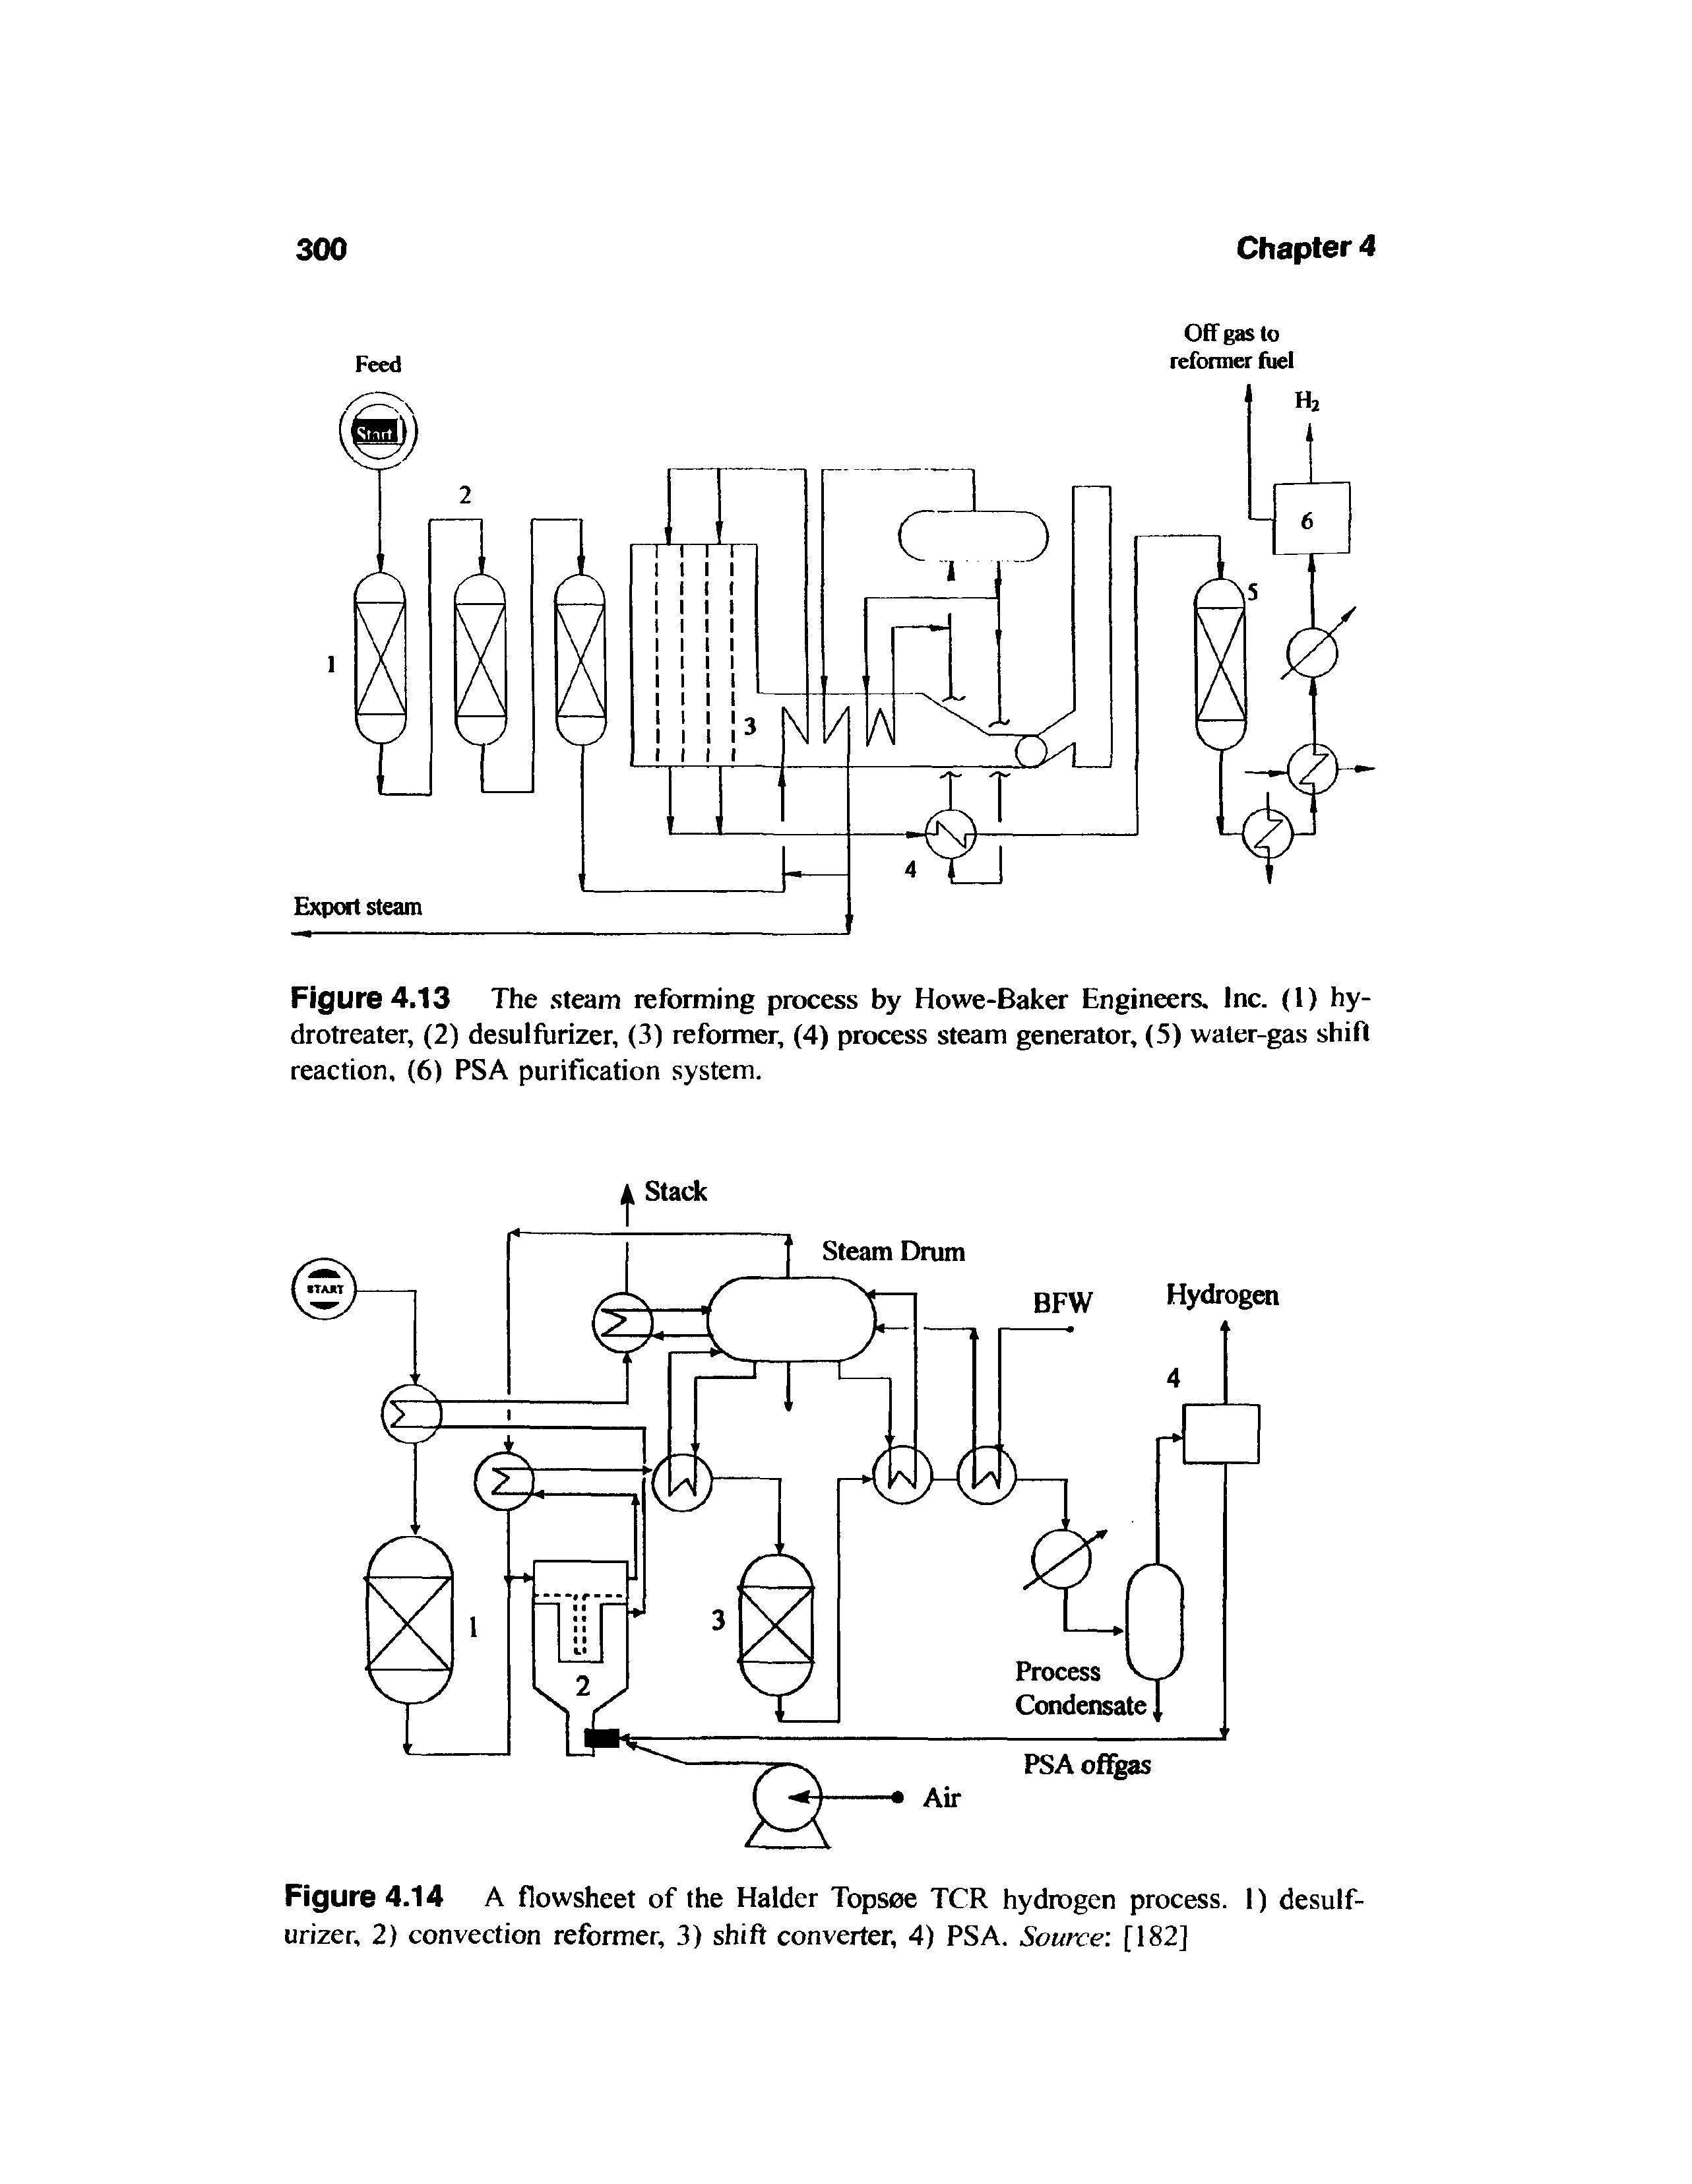 Figure 4.13 The steam reforming process by Howe-Baker Engineers. Inc. (1) hydrotreater, (2) desulfurizer, (3) reformer, (4) process steam generator, (5) water-gas shift reaction, (6) PSA purification system.